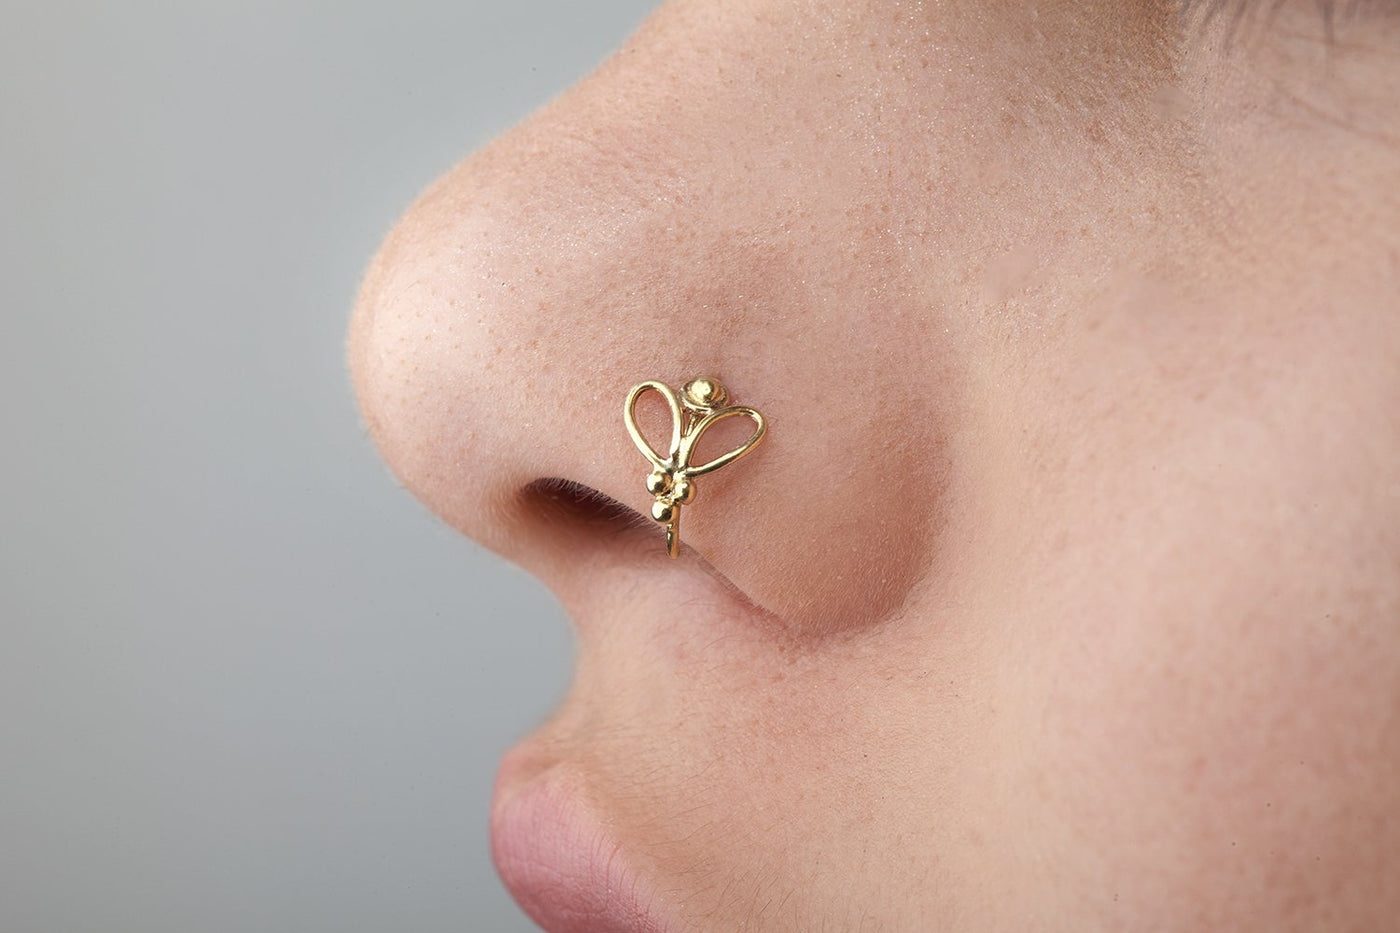 The All Cuff Unique Nose Jewelry Exclusive Nose Ring No 